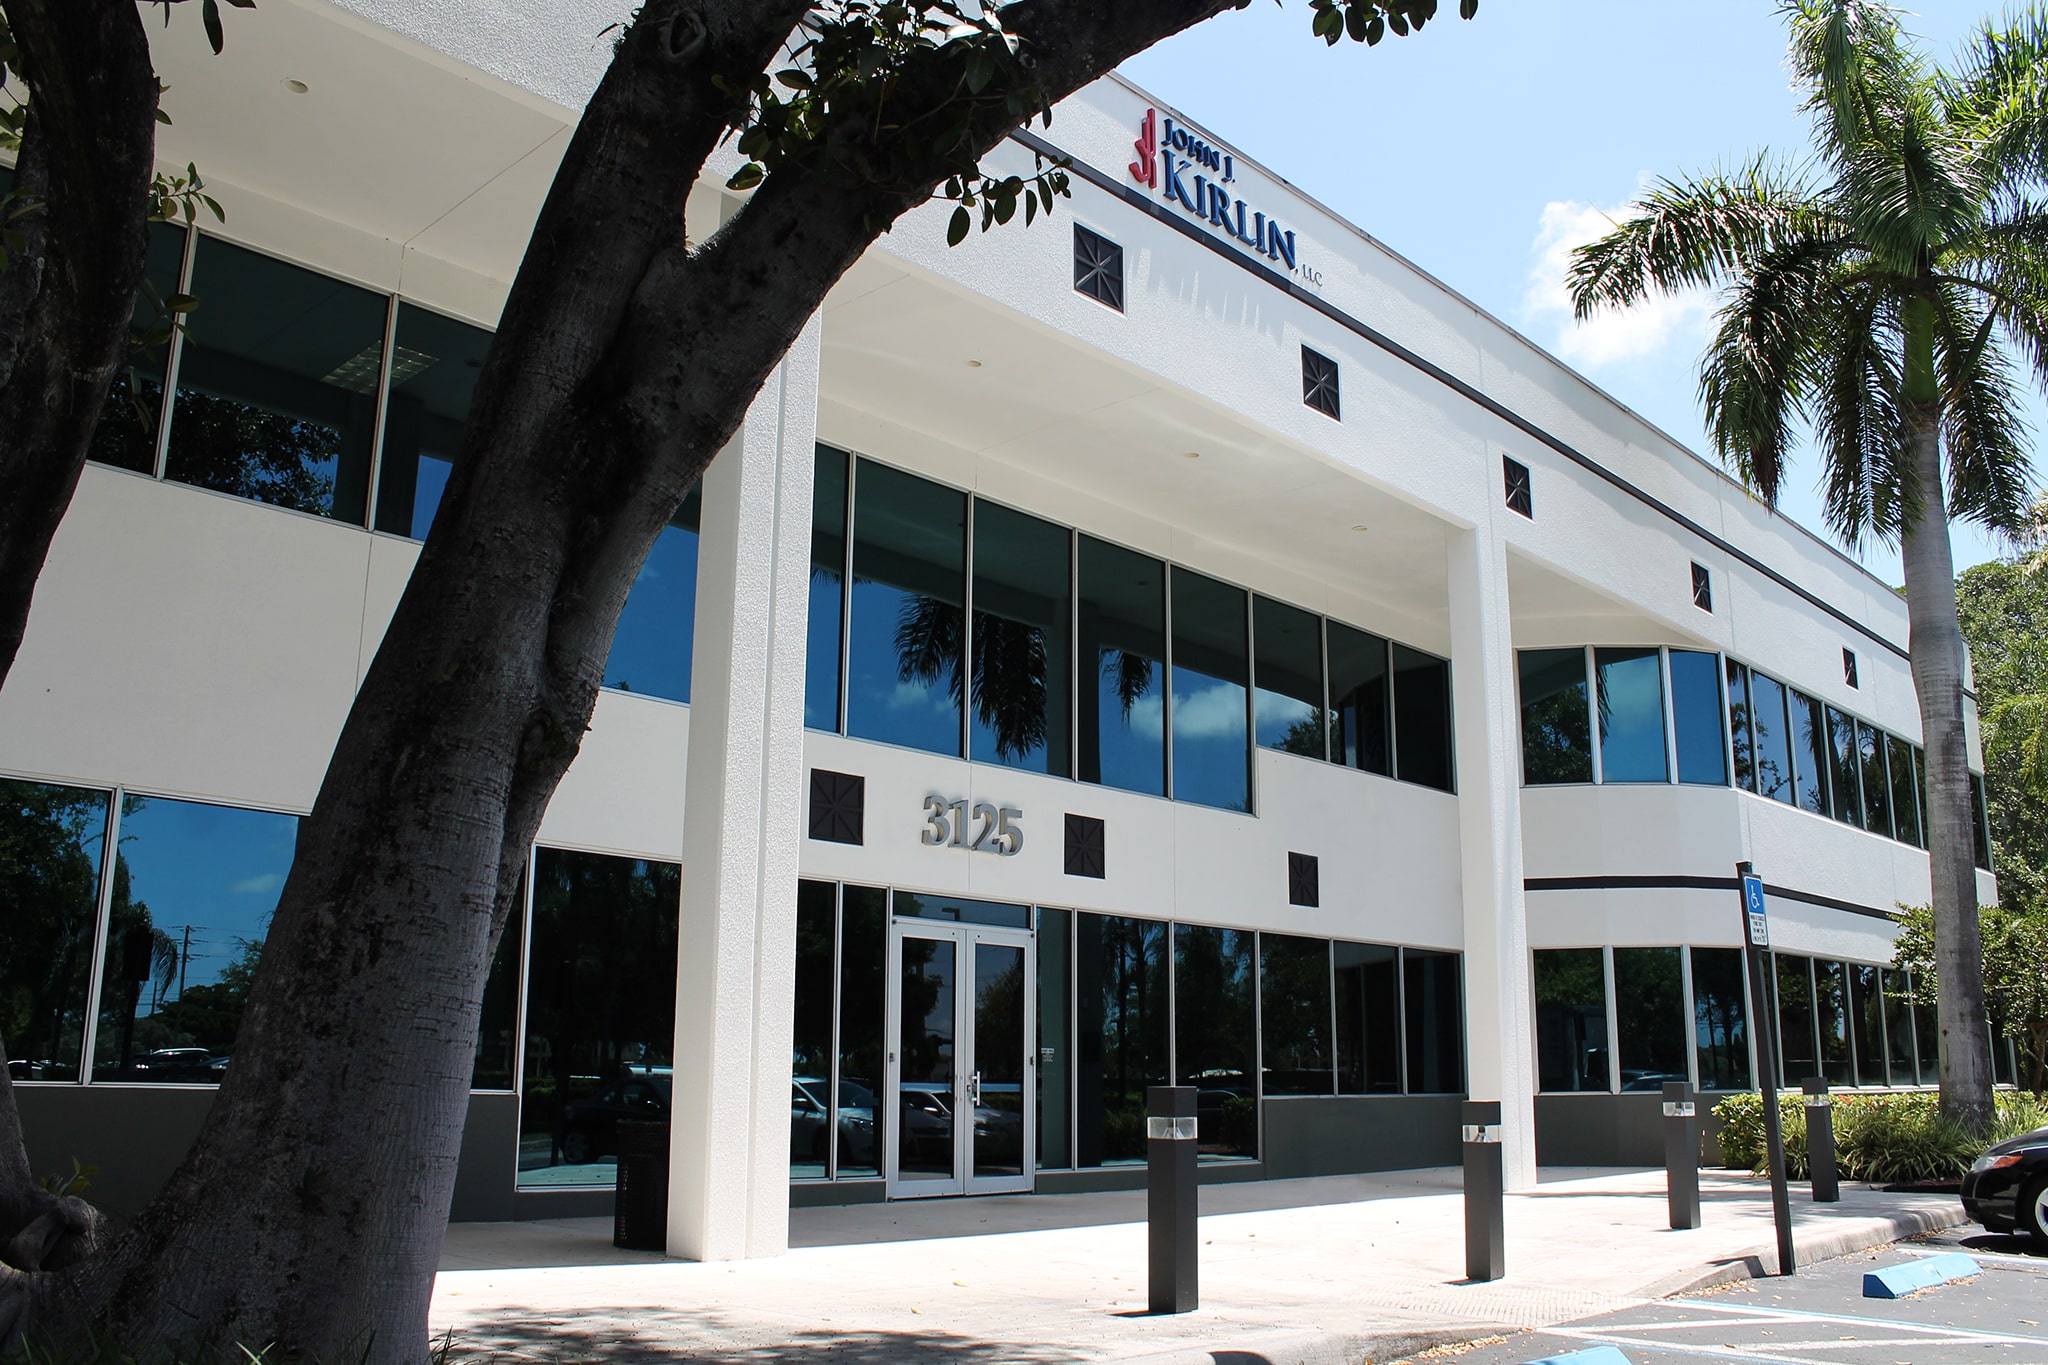 Office Park in South Florida Sold to YMP